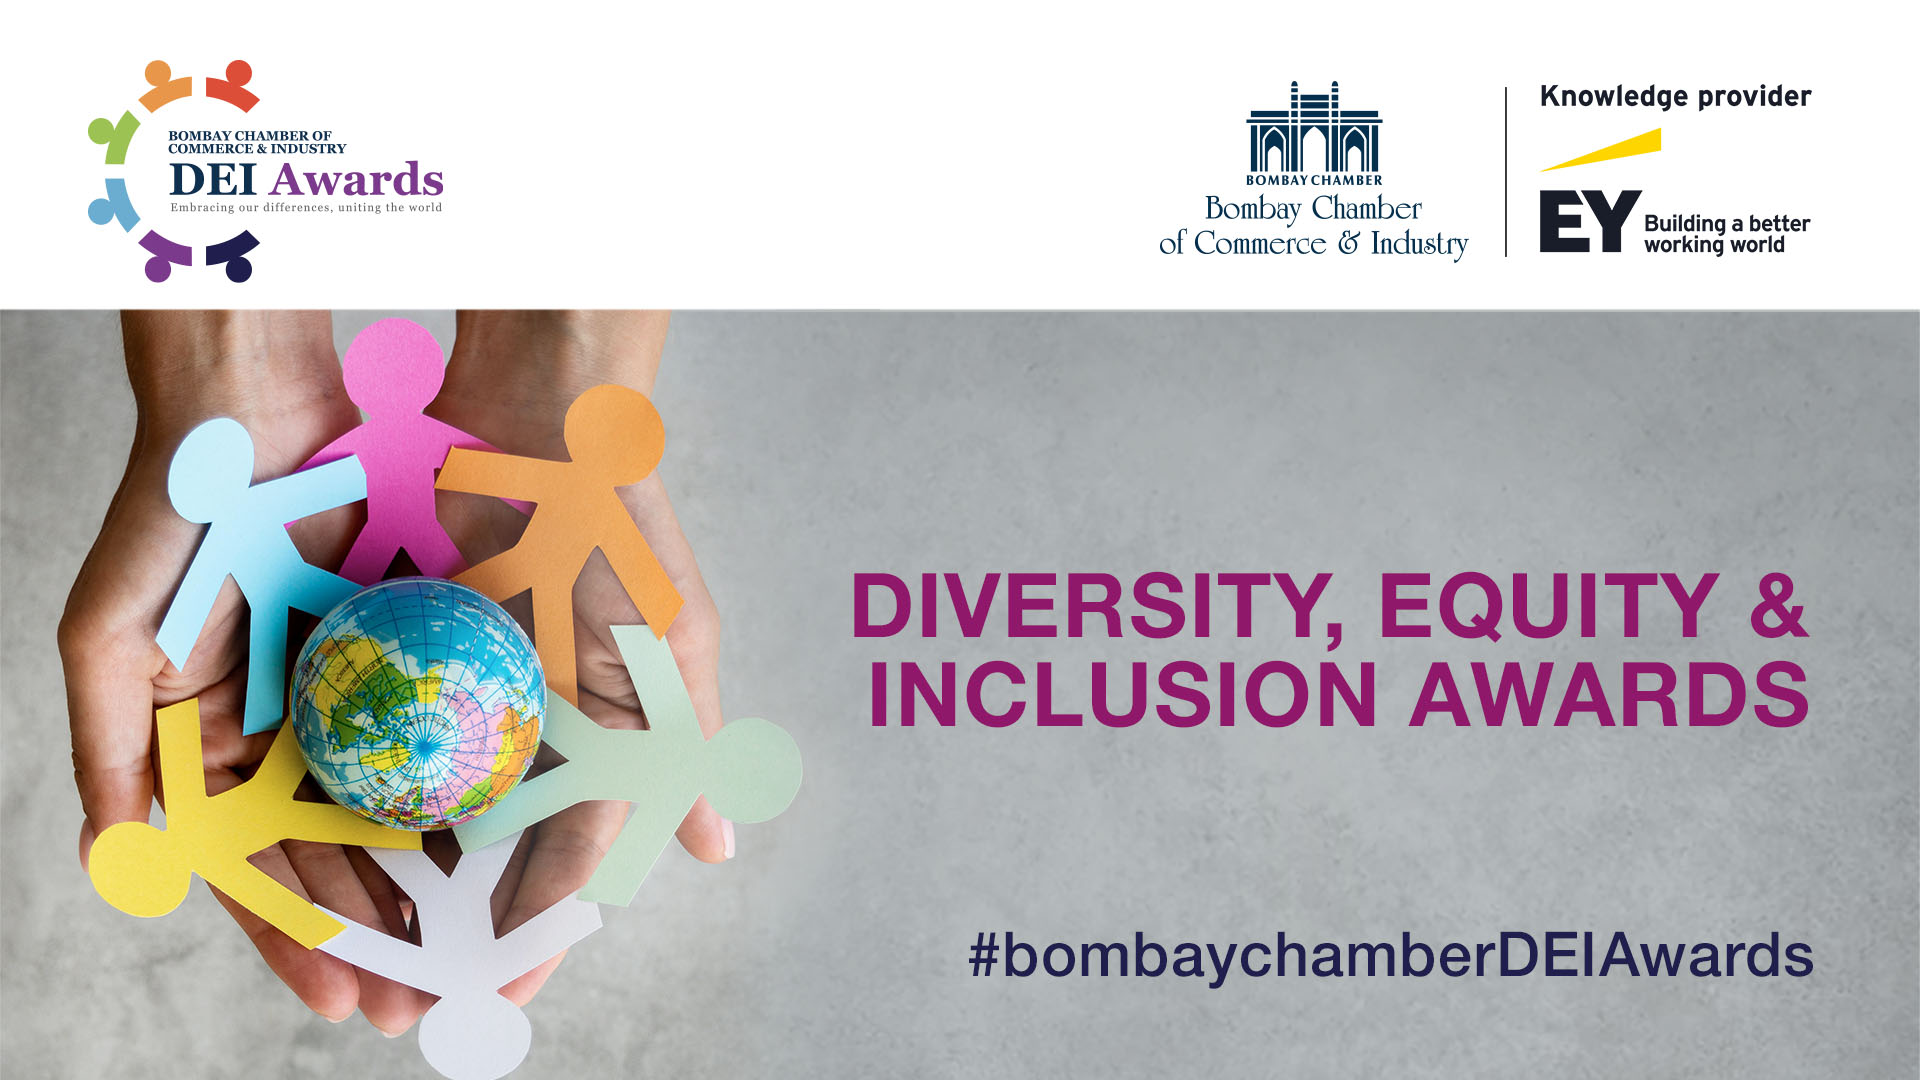 Diversity, Equity & Inclusion (DEI) Awards, 2023 Bombay Chamber